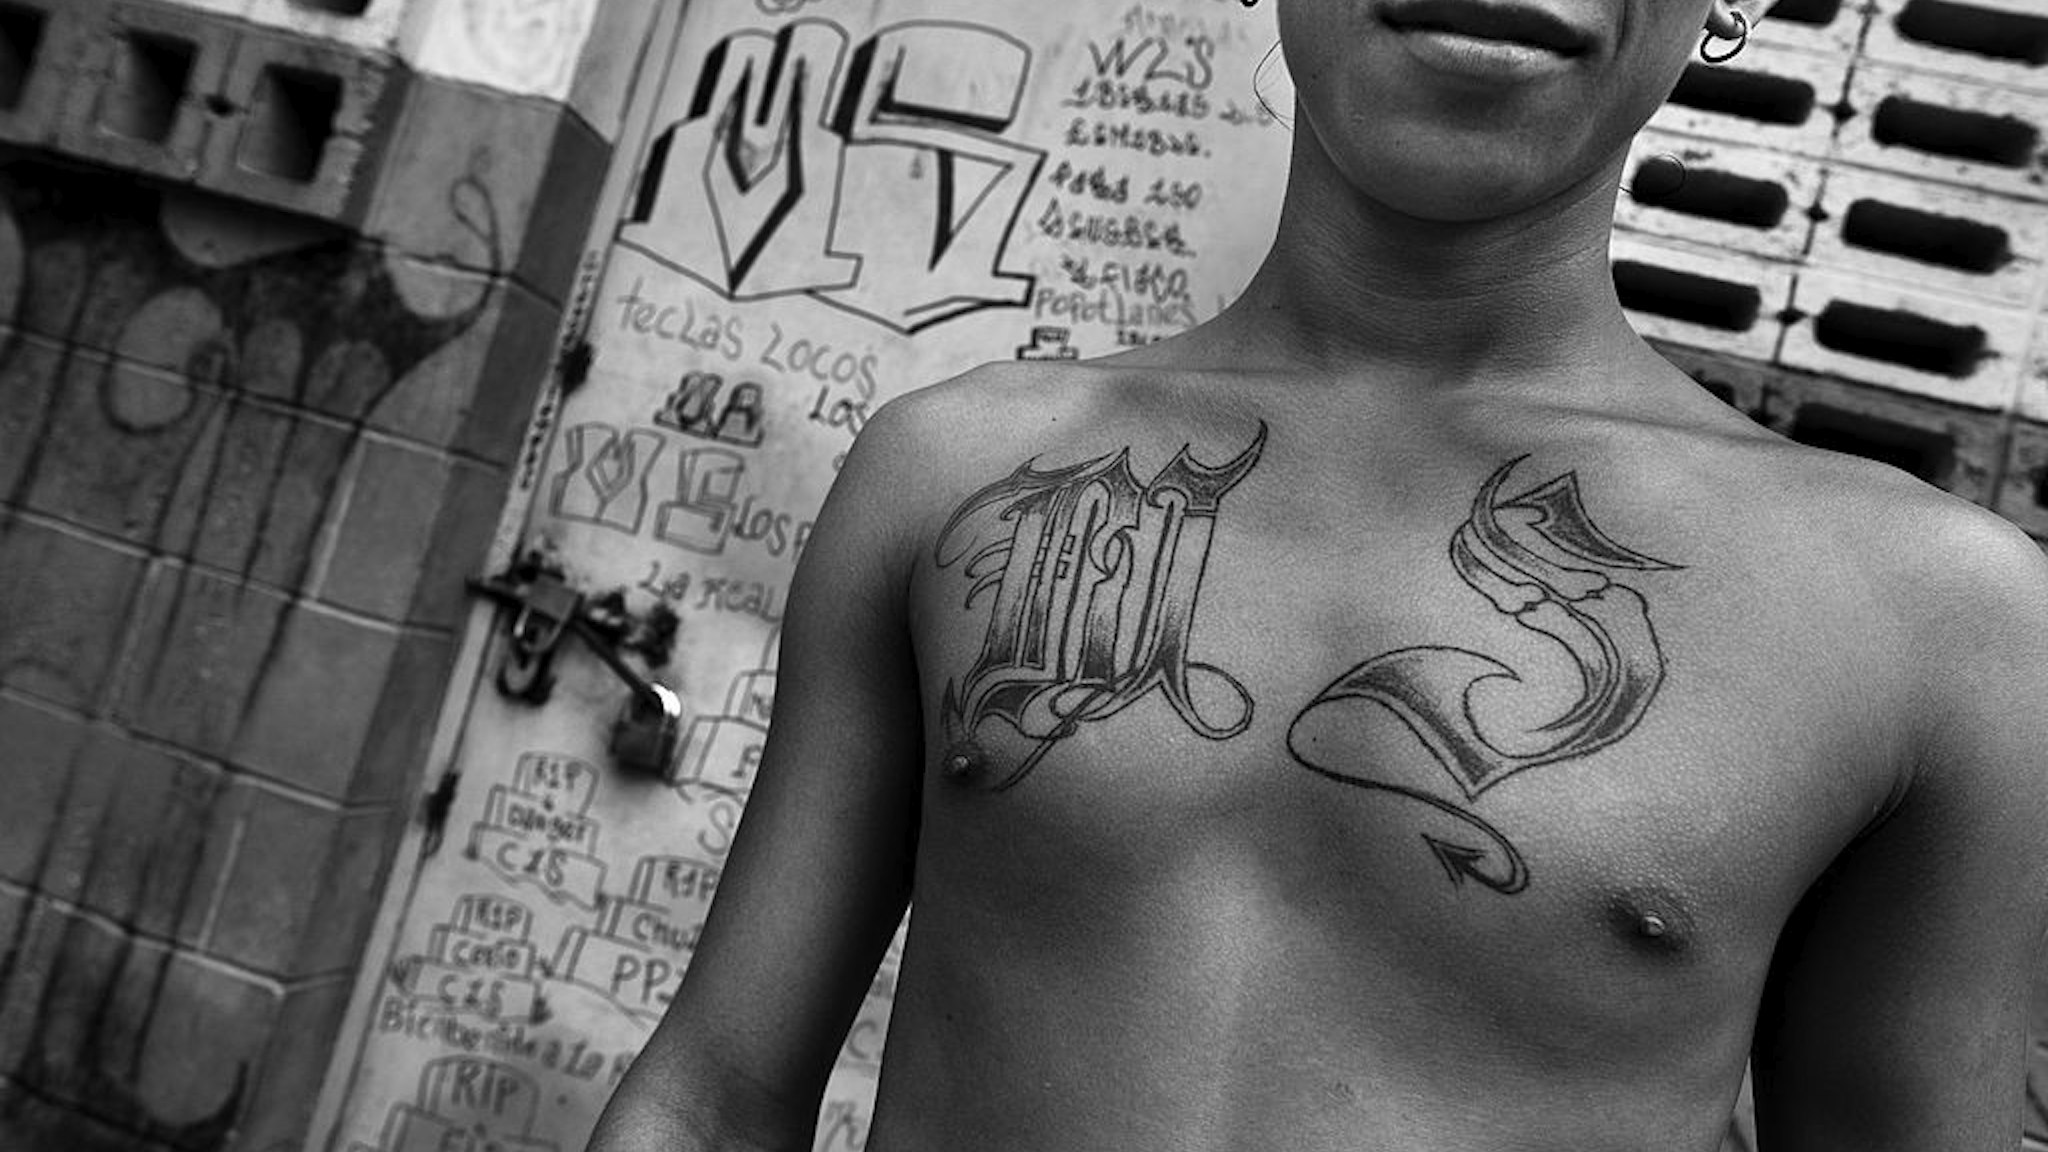 A member of the Mara Salvatrucha gang (MS-13) shows off his gang tattoos in the prison of Tonacatepeque, on 18 May 2011 in Tonacatepeque, El Salvador.